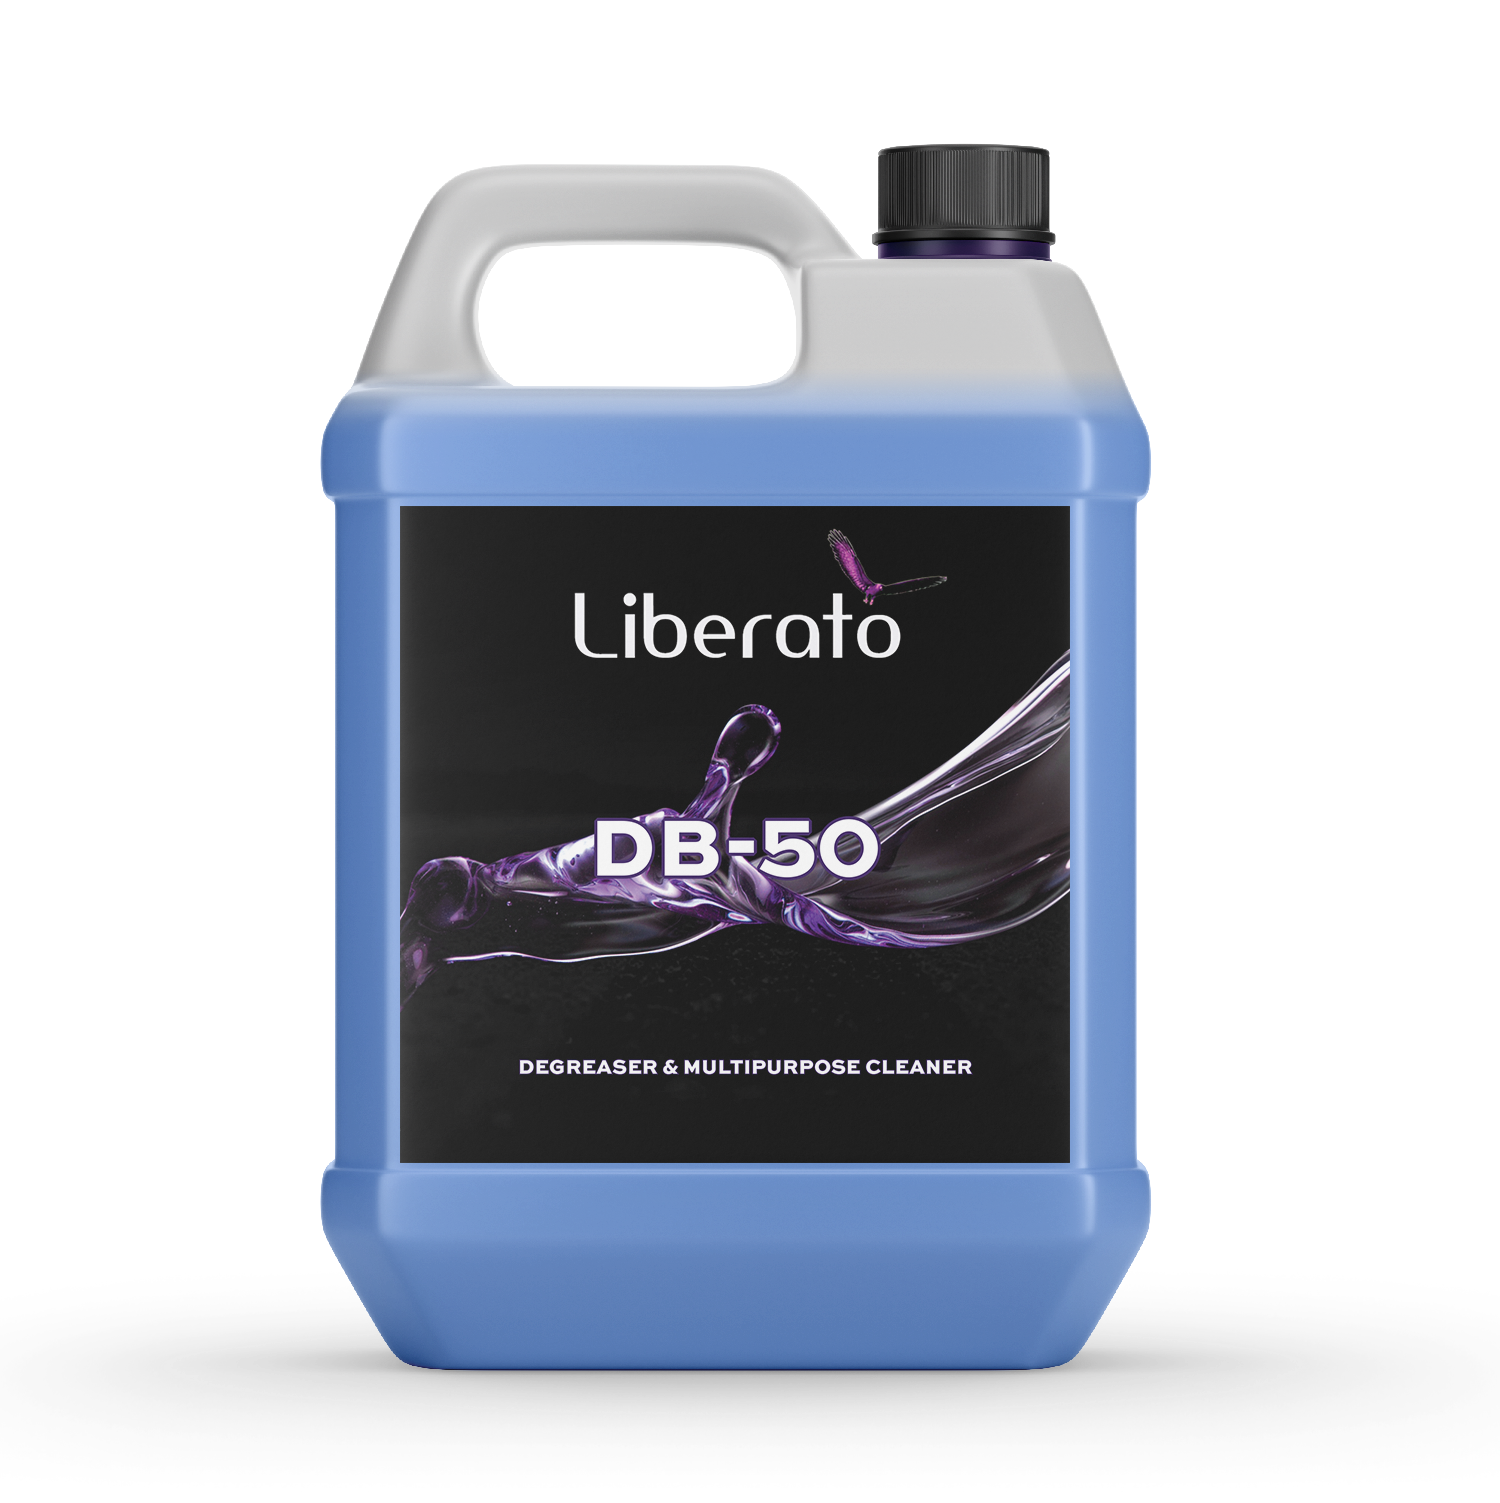 liberato db-50 degreaser and multipurpose cleaner